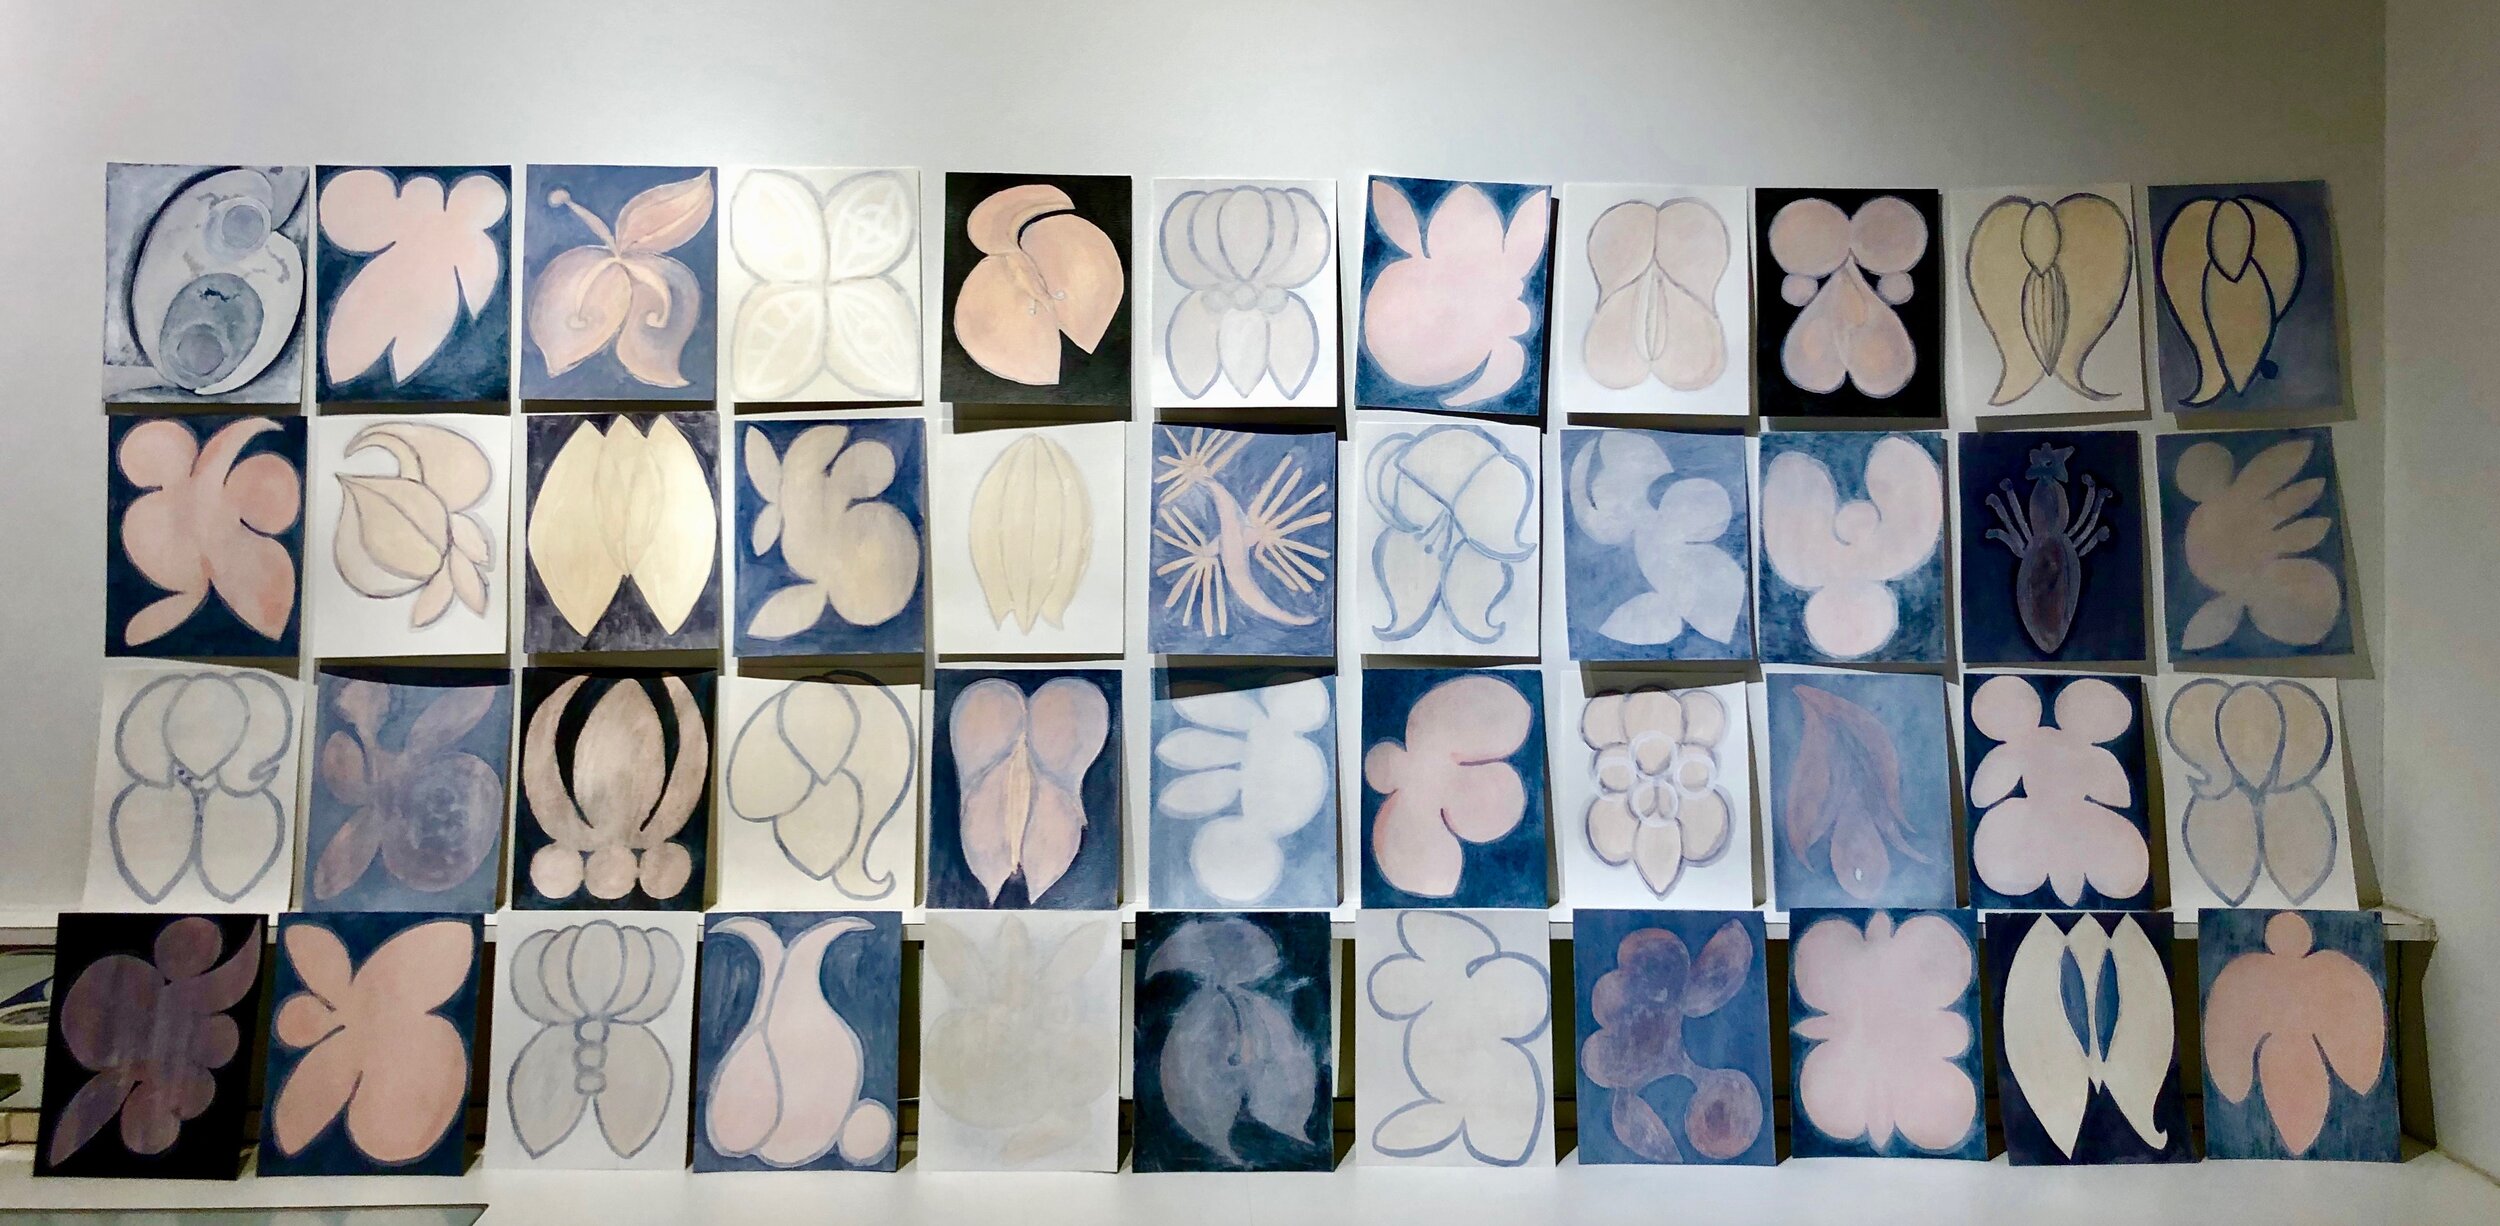 Deconstruction of the Yucca Flower, wc, acrylic, ink. egg tempera on paper, 44 pieces each 8%22x10%22 .jpg